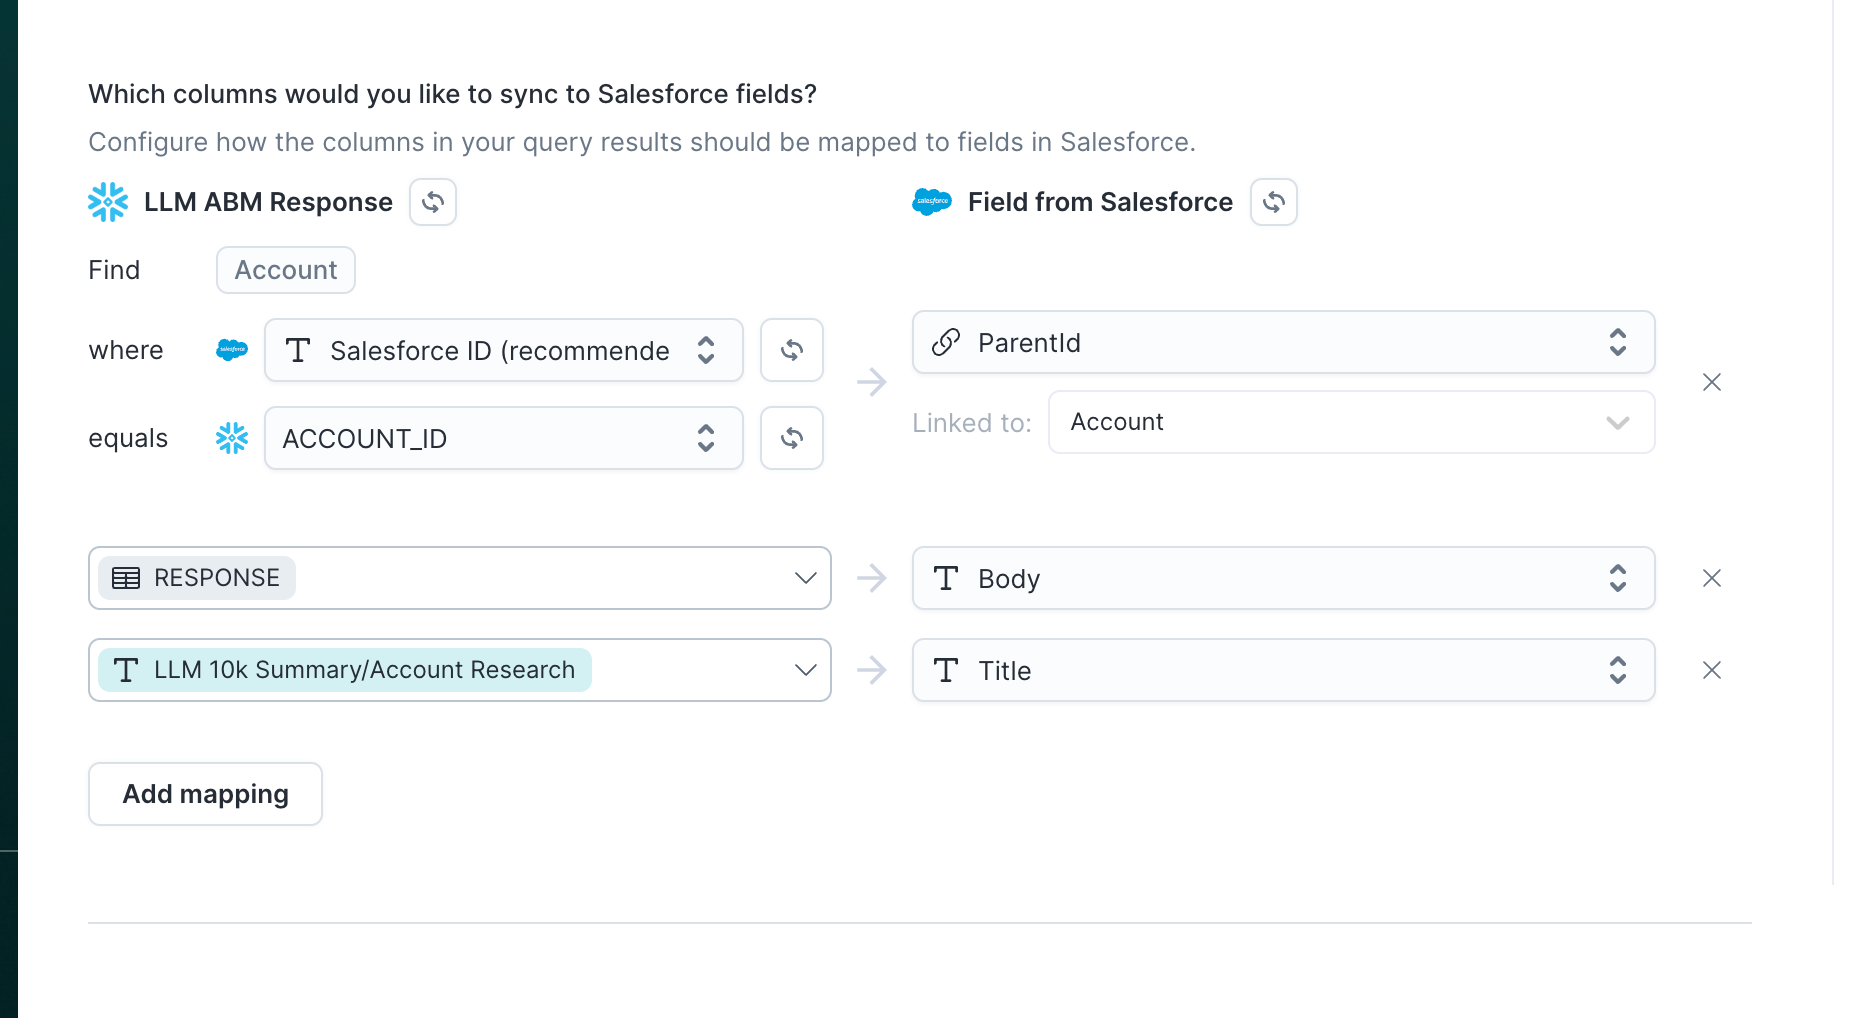 Sync to Salesforce